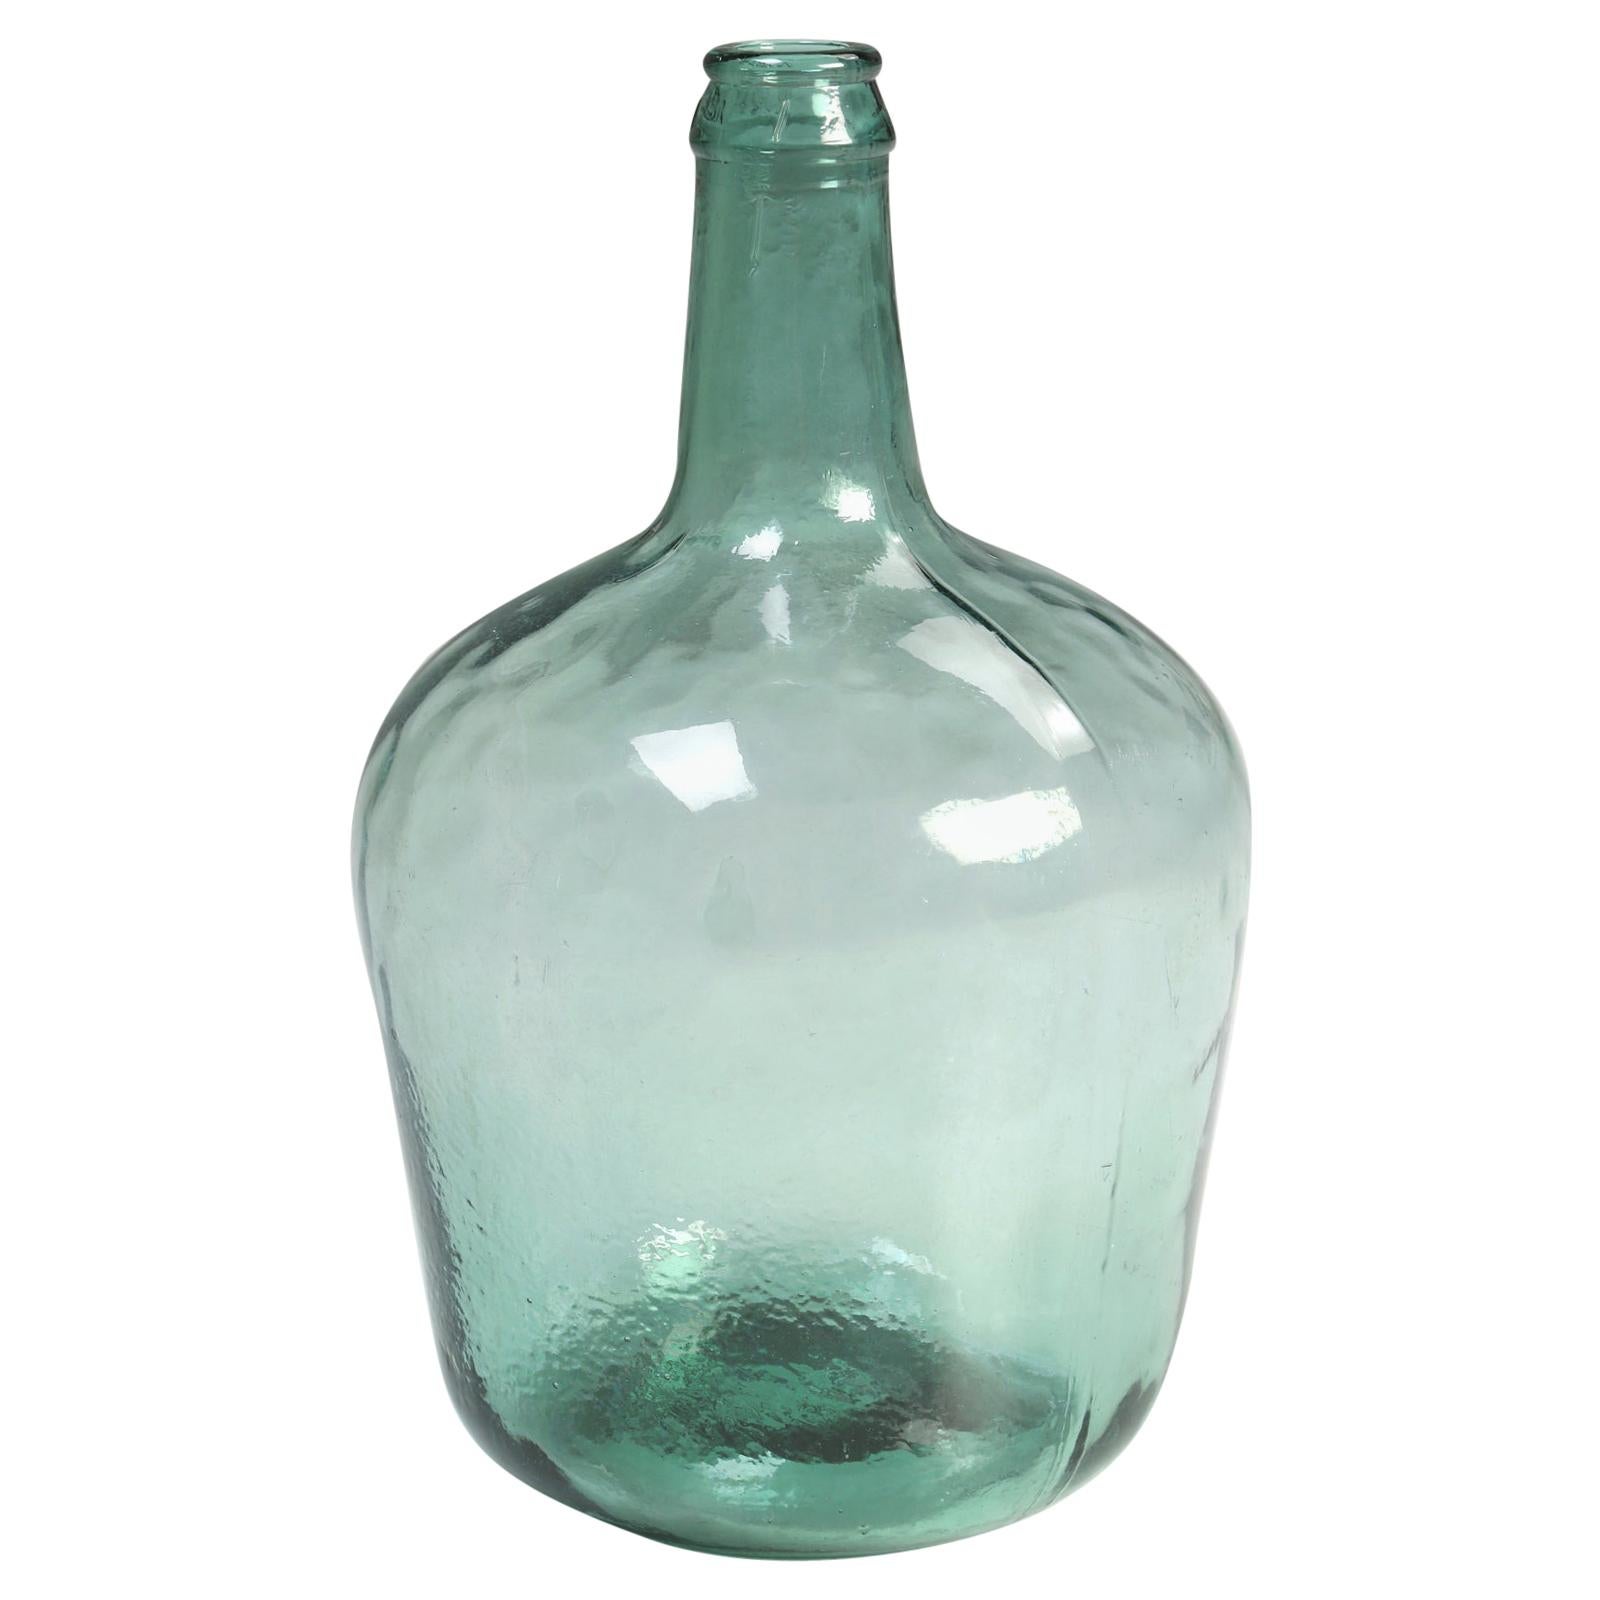 French Demijohn or Carboy Glass Bottle